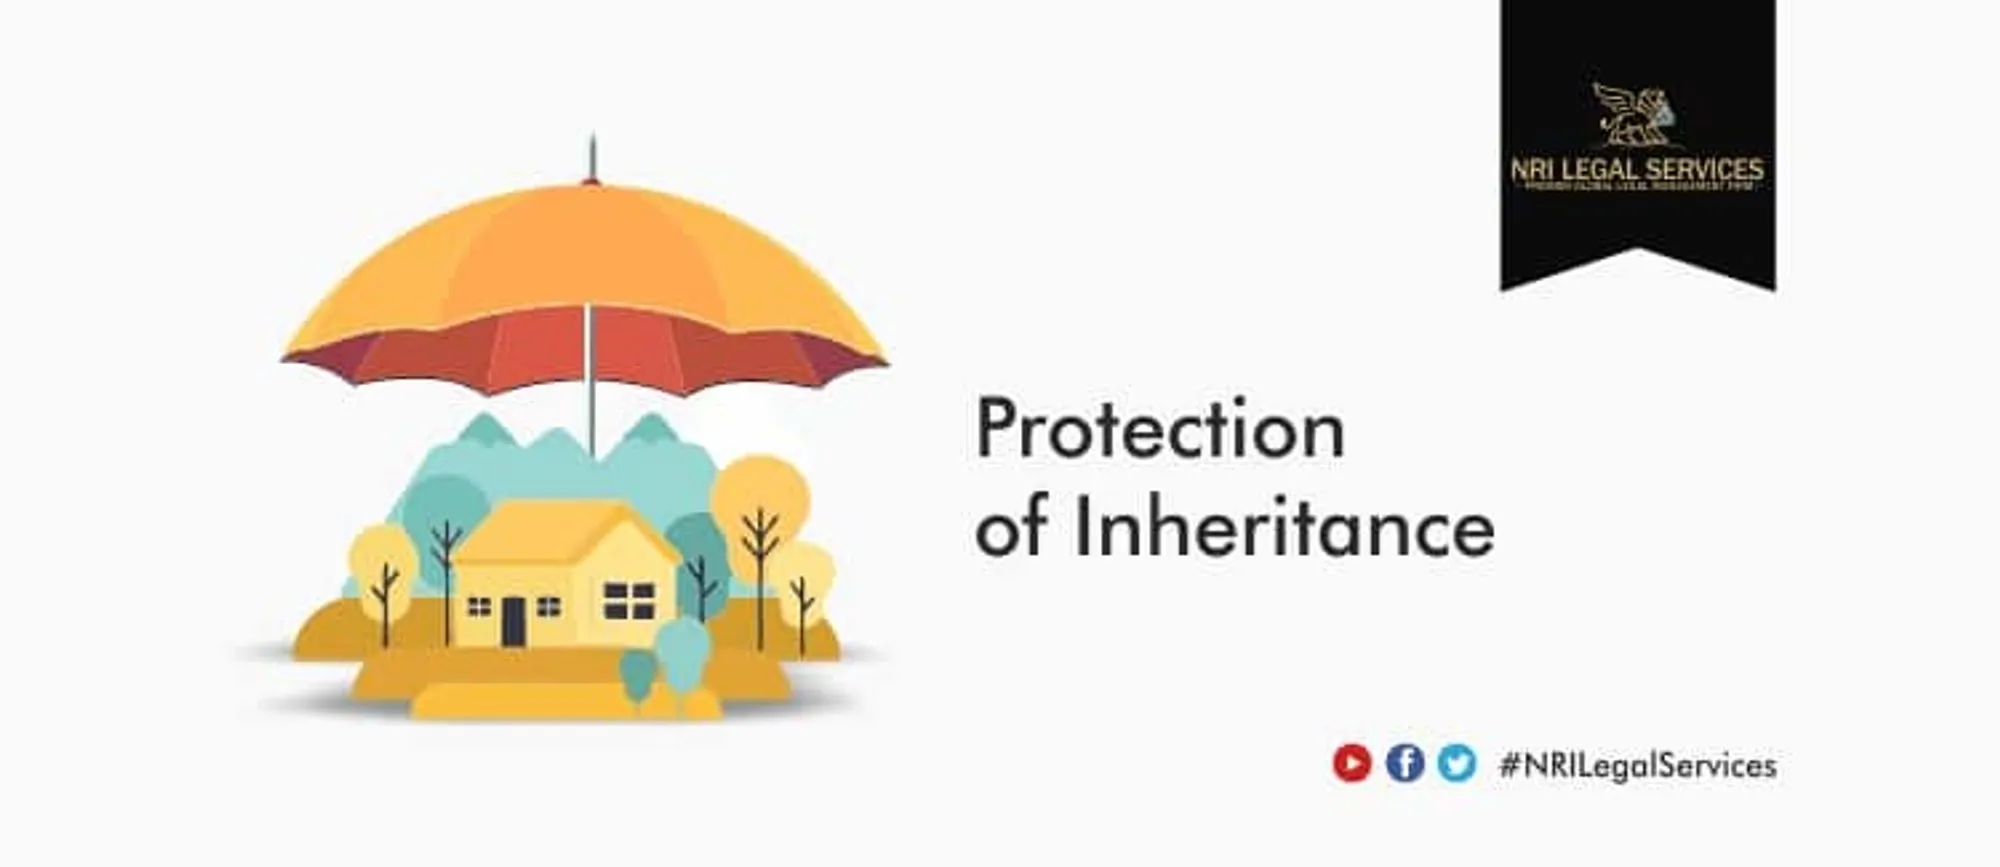 Protection of inheritance rights of women and varying succession laws